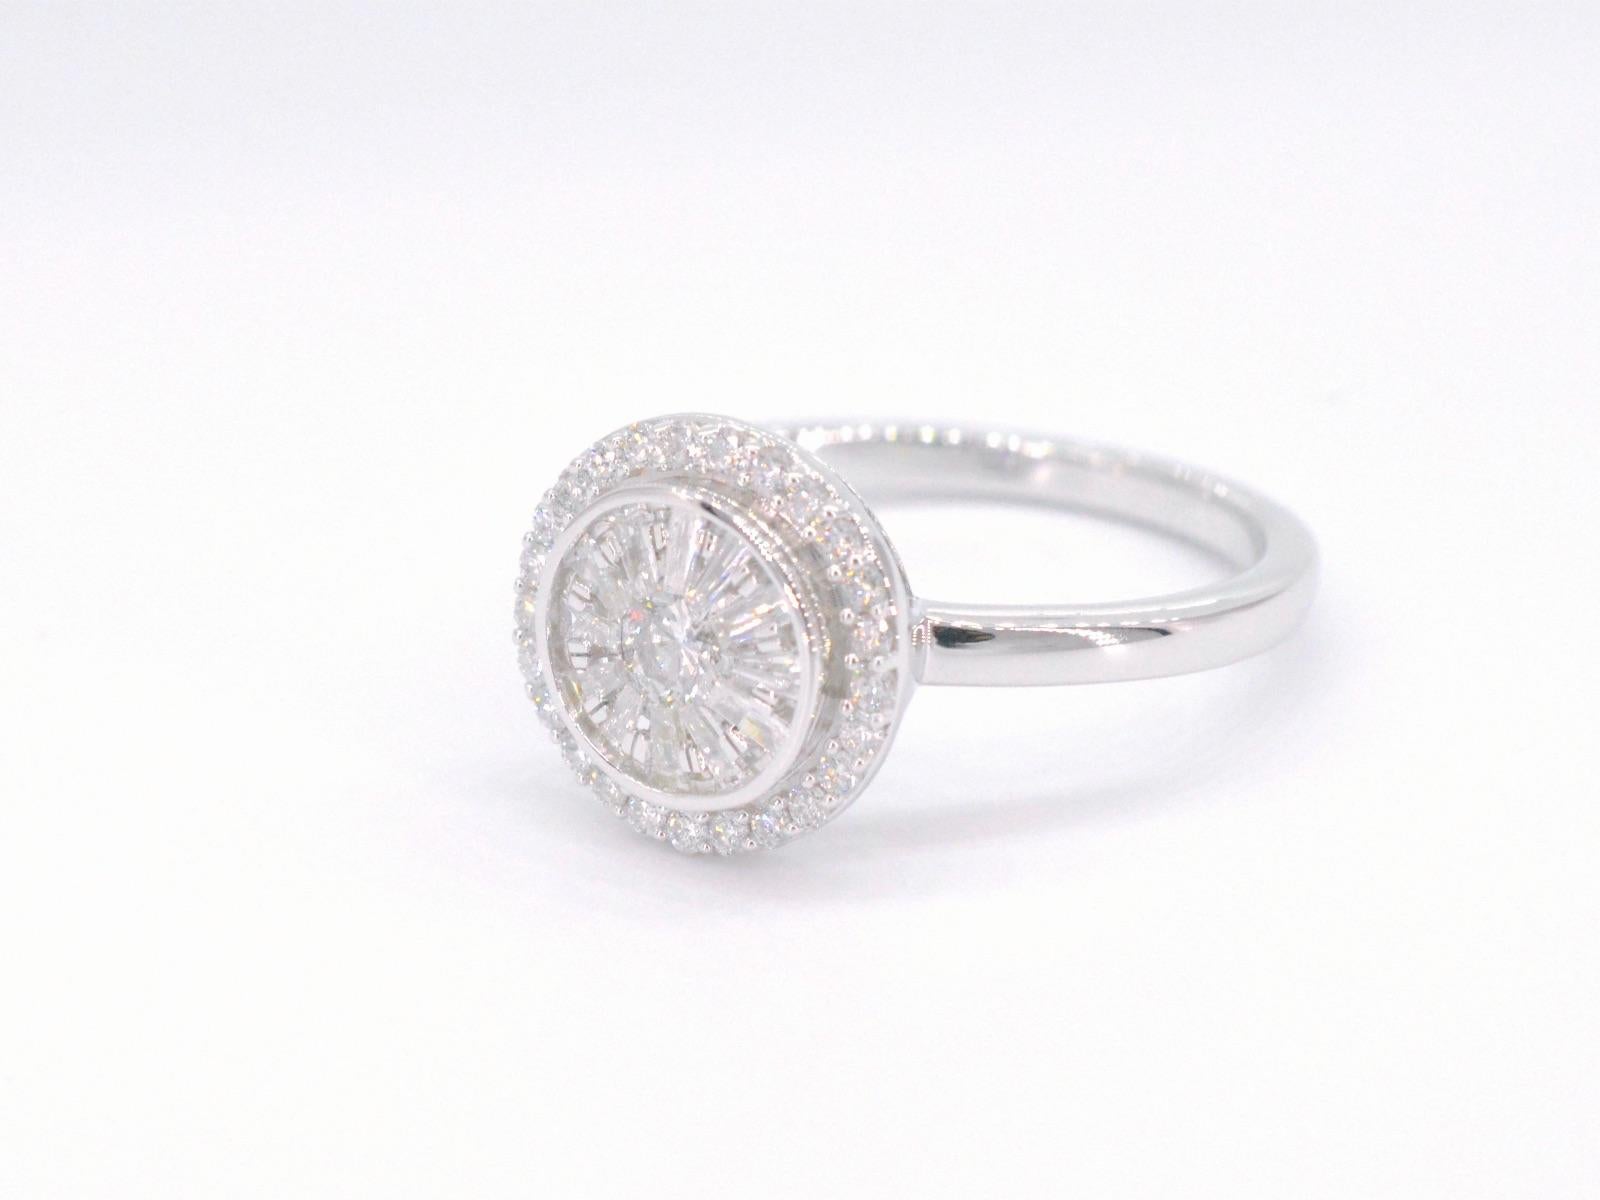 A white gold ring with brilliant and baguette cut diamonds in a round model is a stunning piece of jewelry that exudes luxury and sophistication. The brilliant and baguette cut diamonds are expertly arranged in a round model, creating a striking